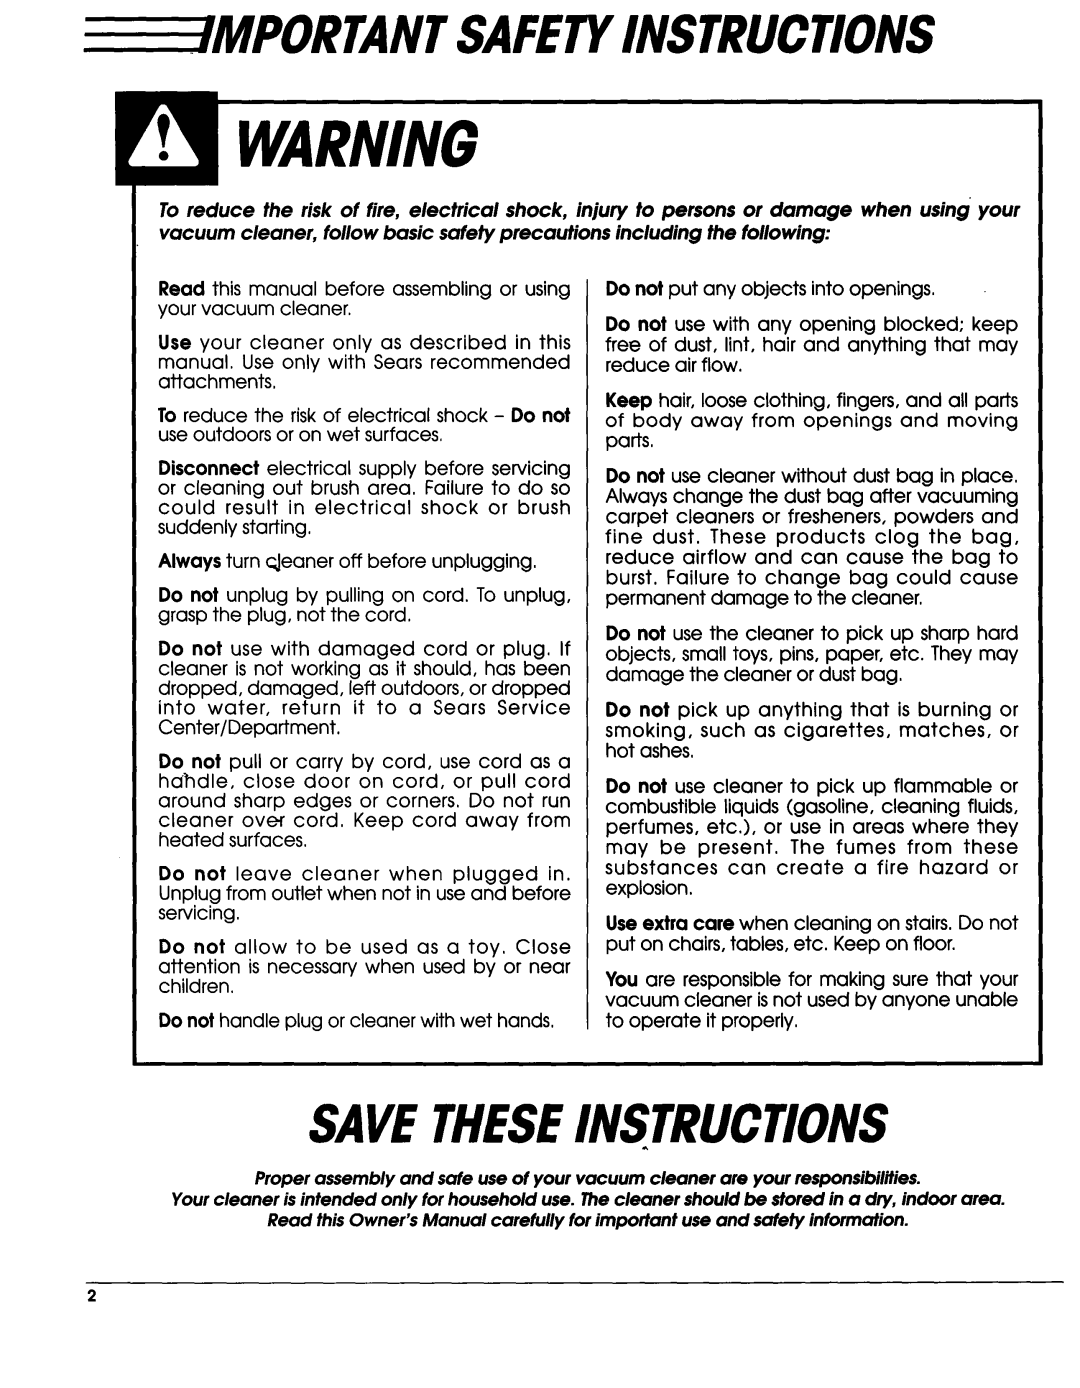 Sears Vacuum Cleaner Eeee Mportantsafetyinstructions, SAliE THESEINSTRUCTIONS, Do not pick up anything that isburning or 